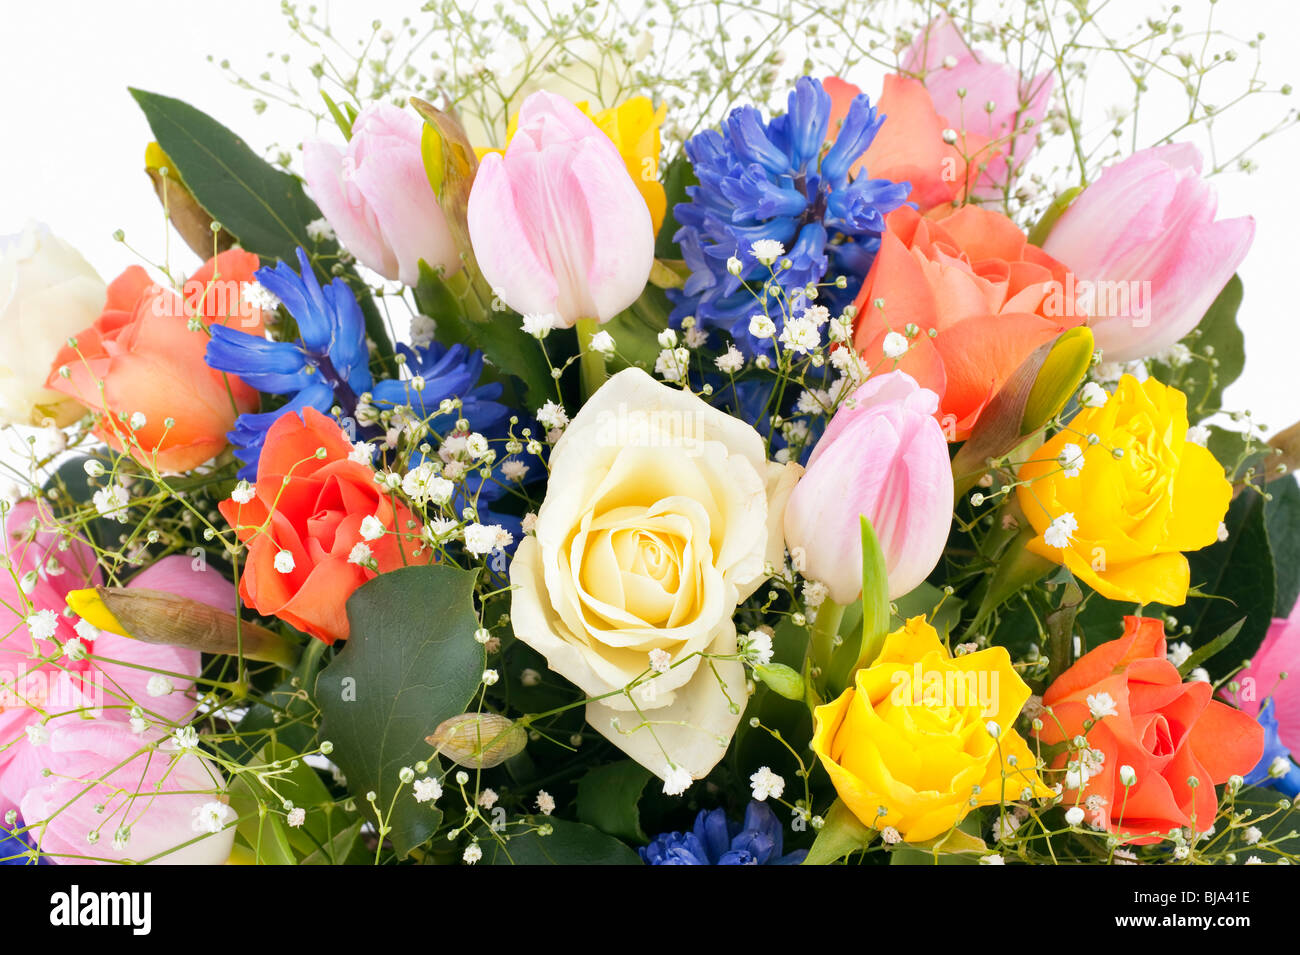 Spring flower arrangement in vase with roses, tulips hyacinth, daffodil and green leaves Stock Photo